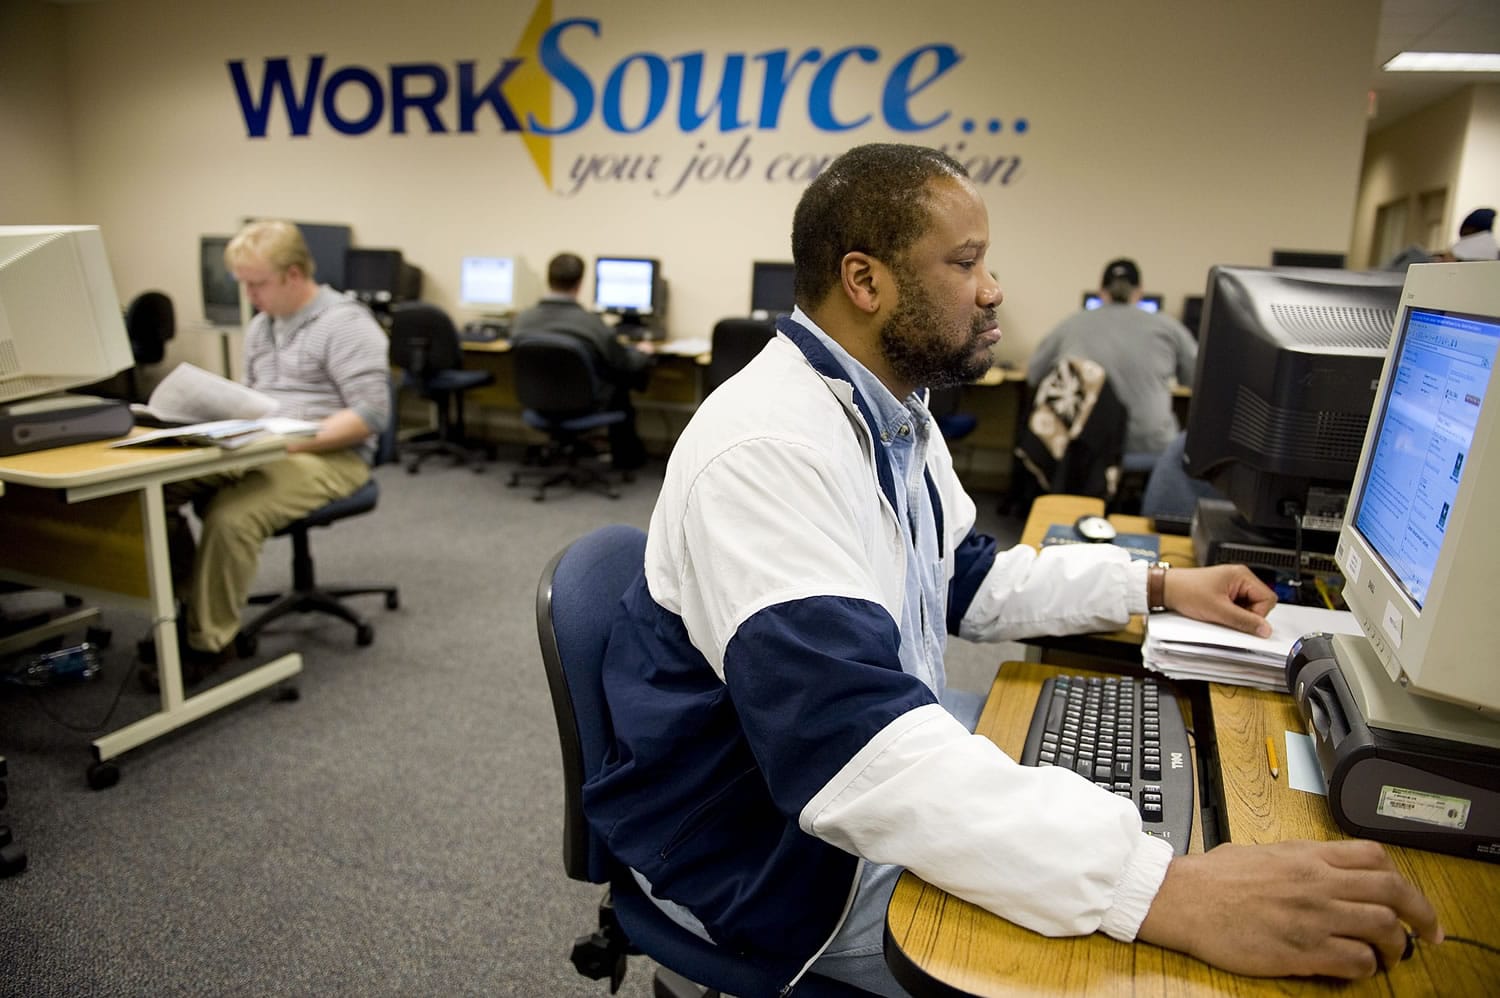 WorkSource in Vancouver offers  resources for job-seekers.